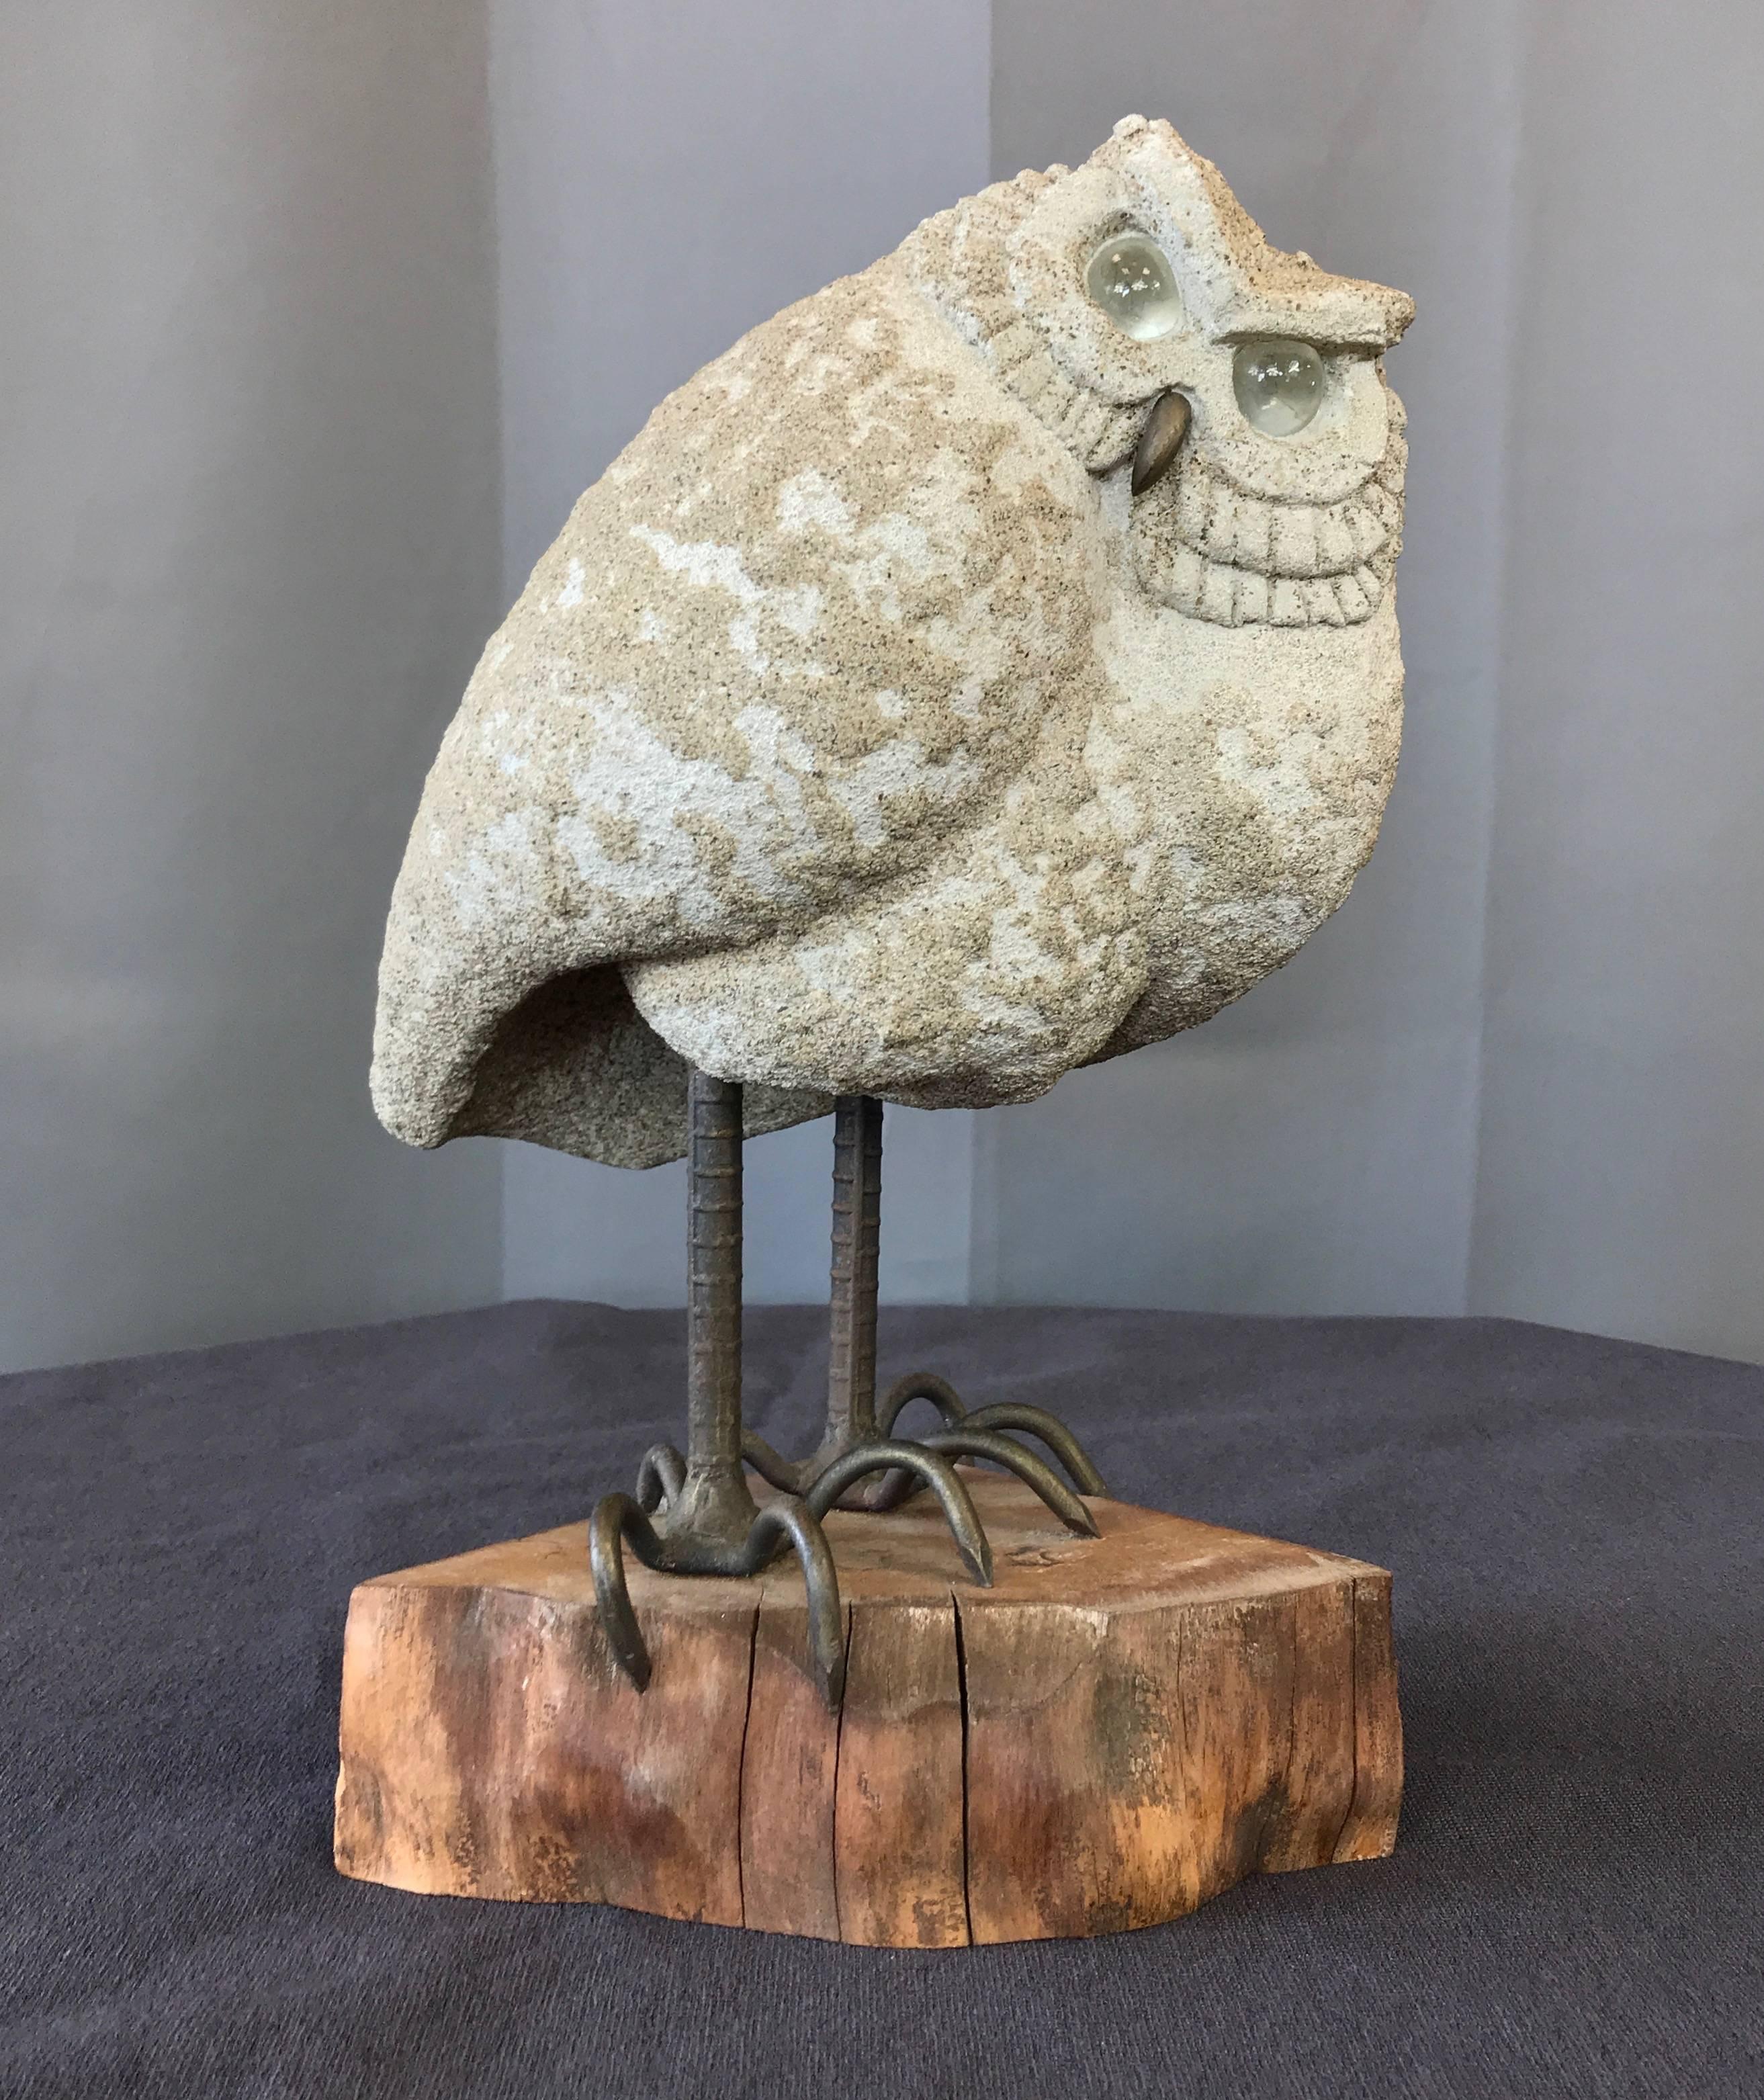 An elusive and endearingly judgmental owl sculpture by celebrated midcentury California artist Lou Rankin.

Stand-offish sandy-textured cast concrete body, with large clear glass eyes that direct an incredulous gaze. Bronze-finish metal beak, with